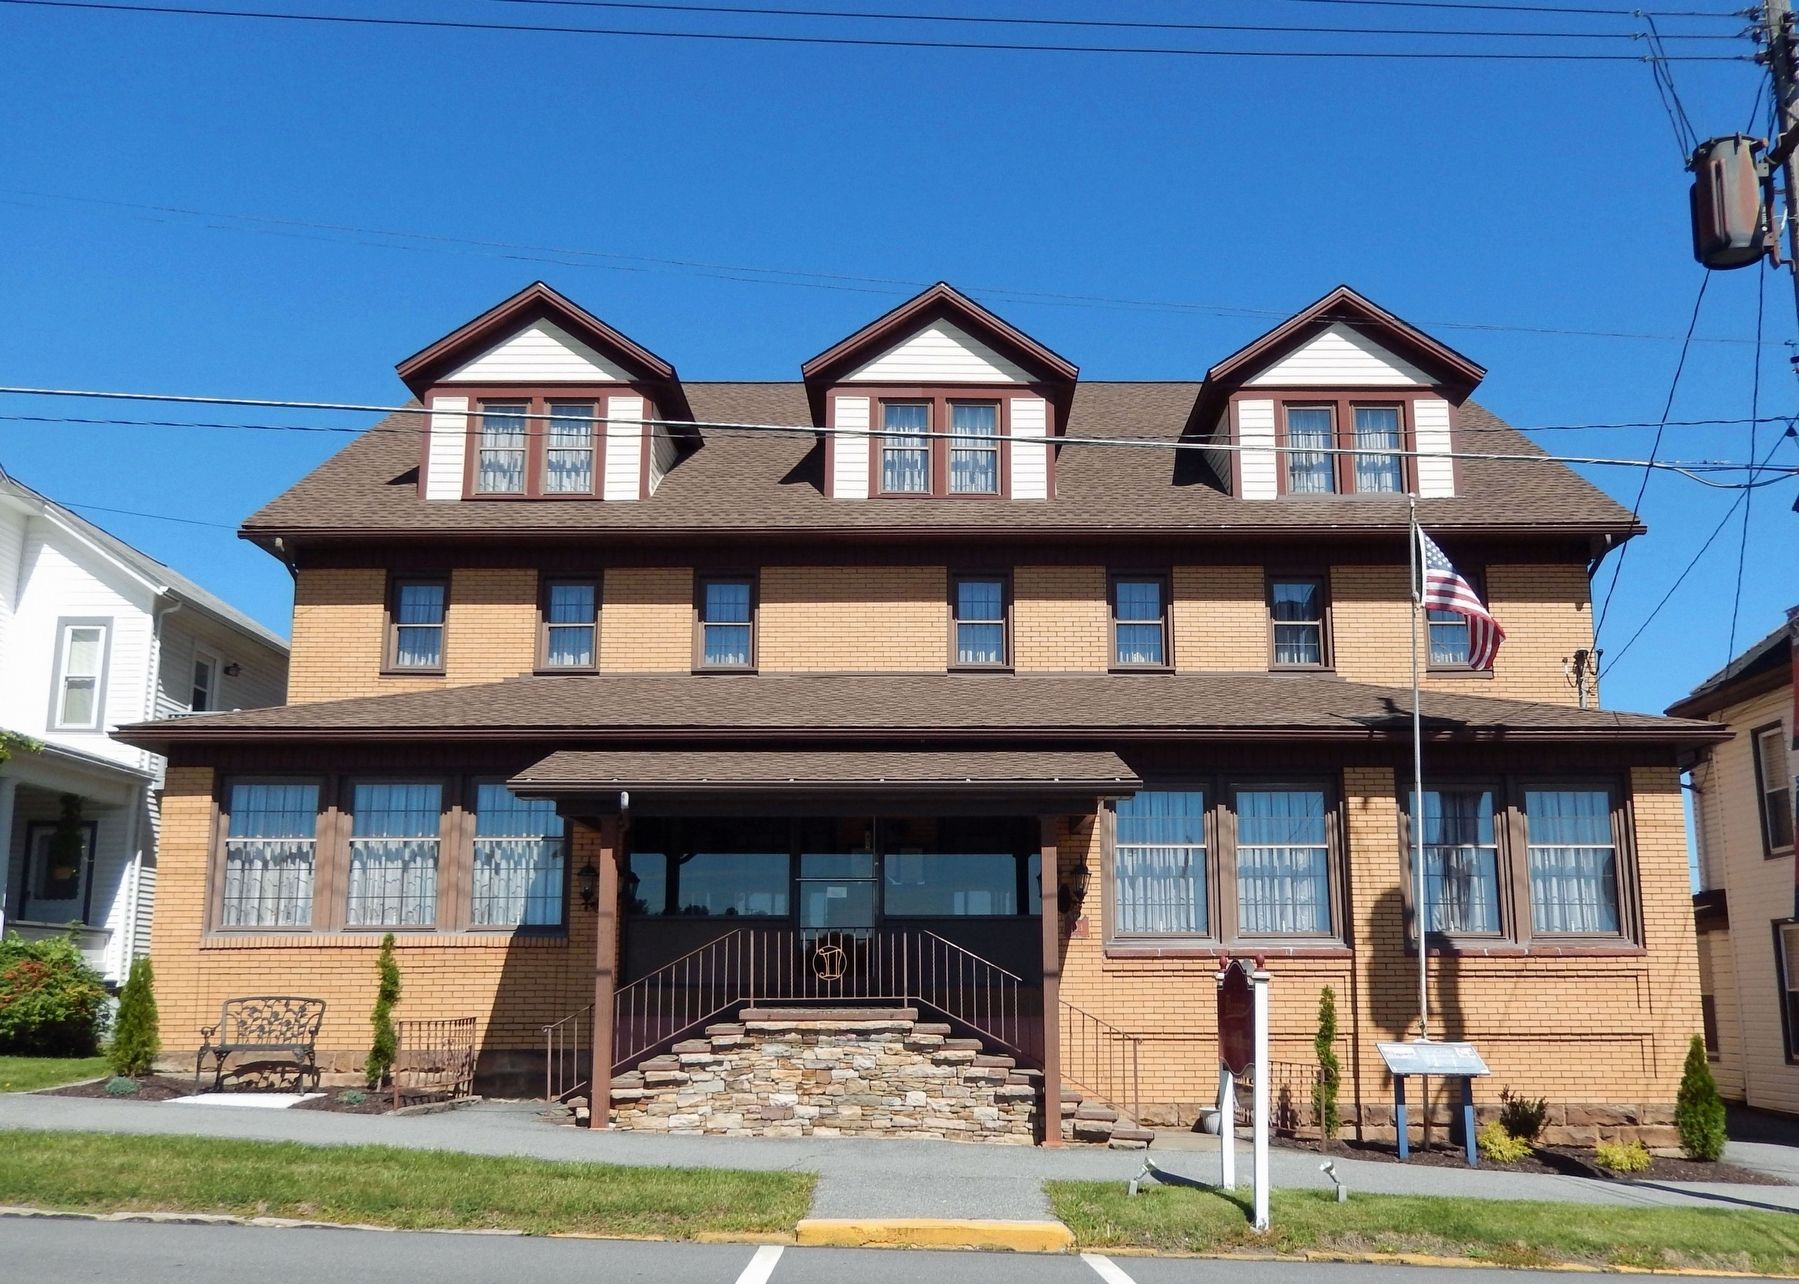 Deaner Funeral Home (formerly the Graham House Hotel) image. Click for full size.